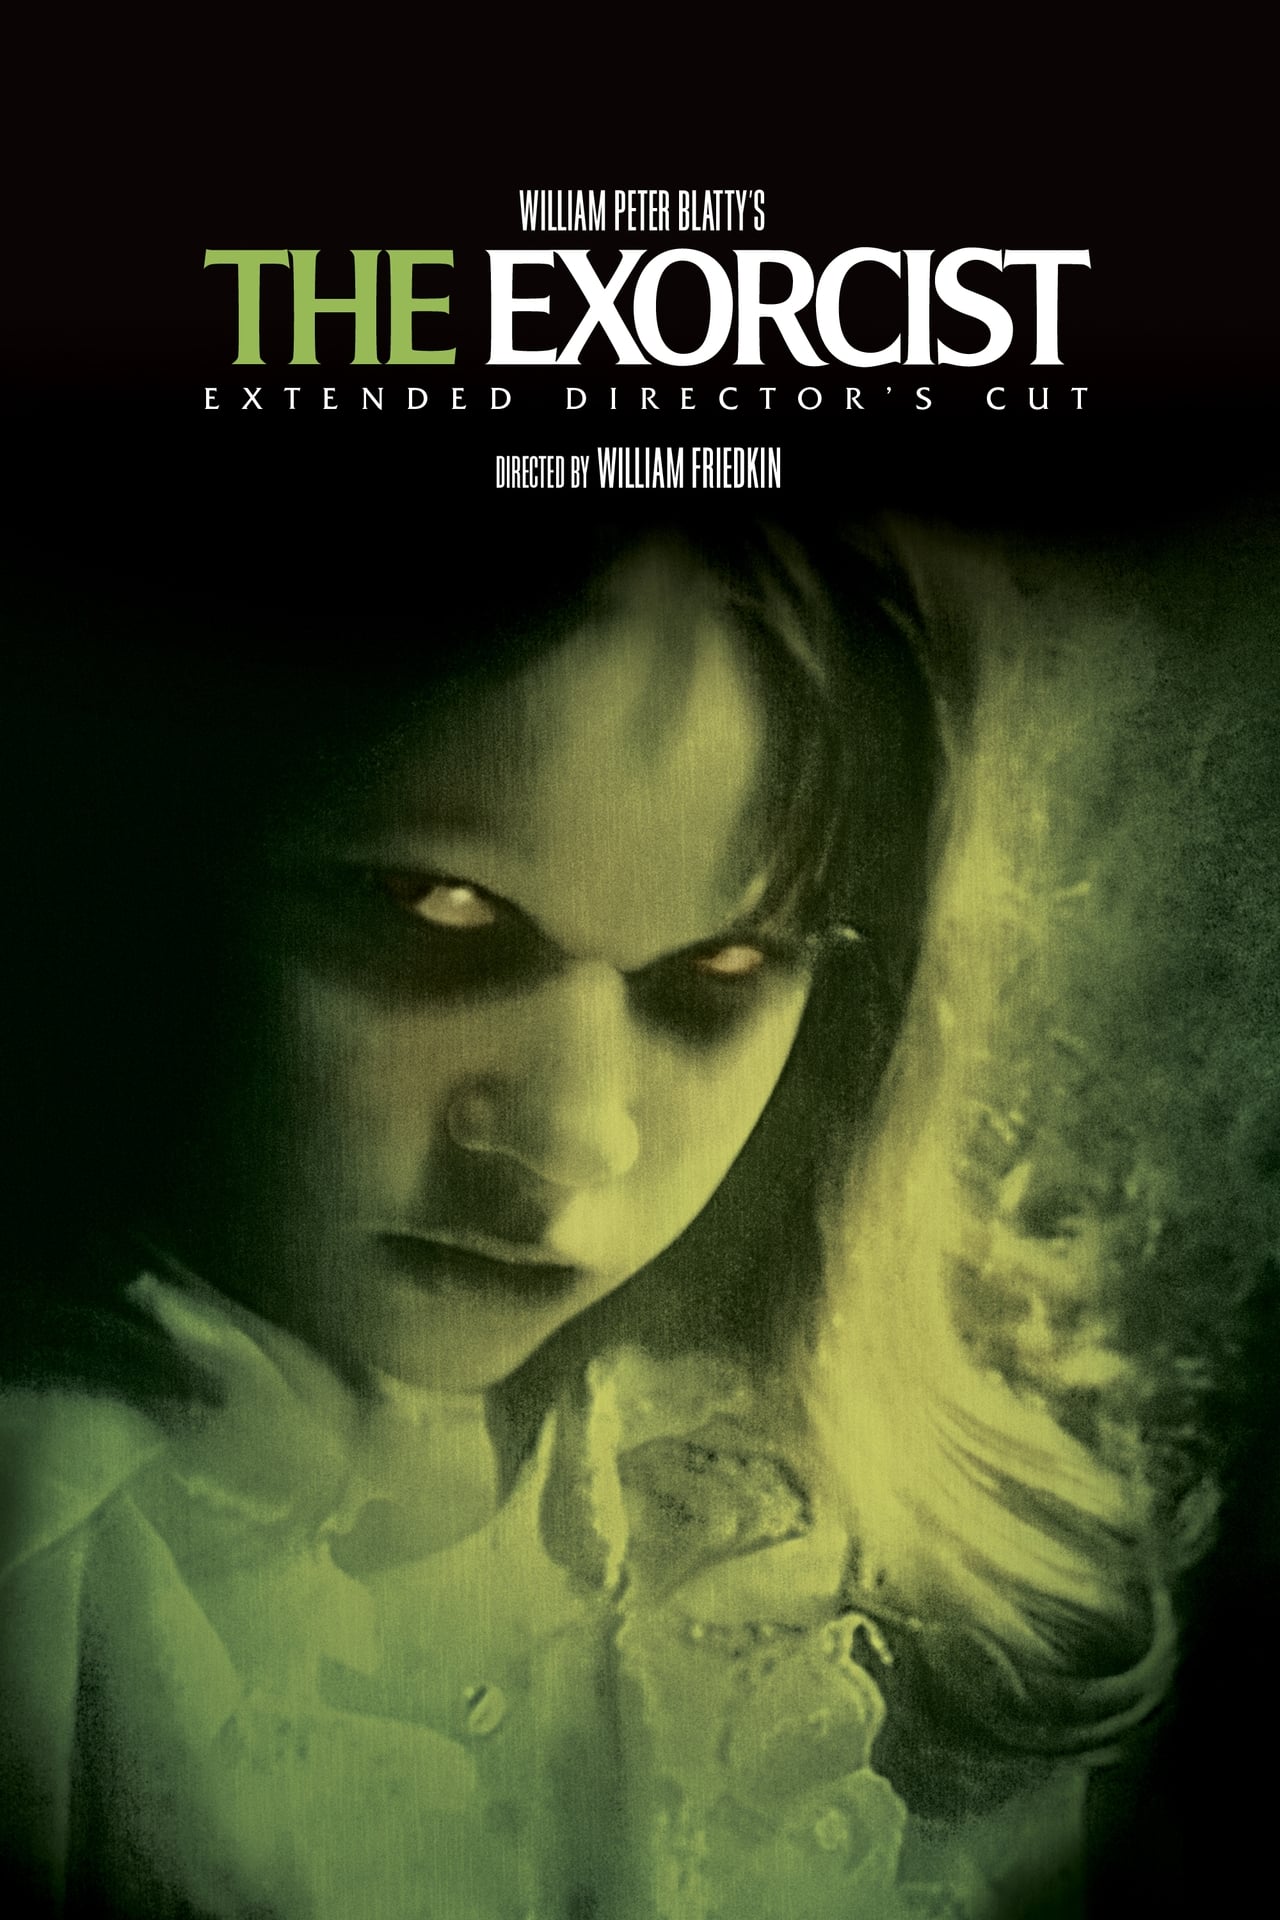 The Exorcist (1973) Extended & Director's Cut 2840Kbps 23.976Fps 48Khz BluRay DTS-HD MA 5.1Ch Turkish Audio TAC